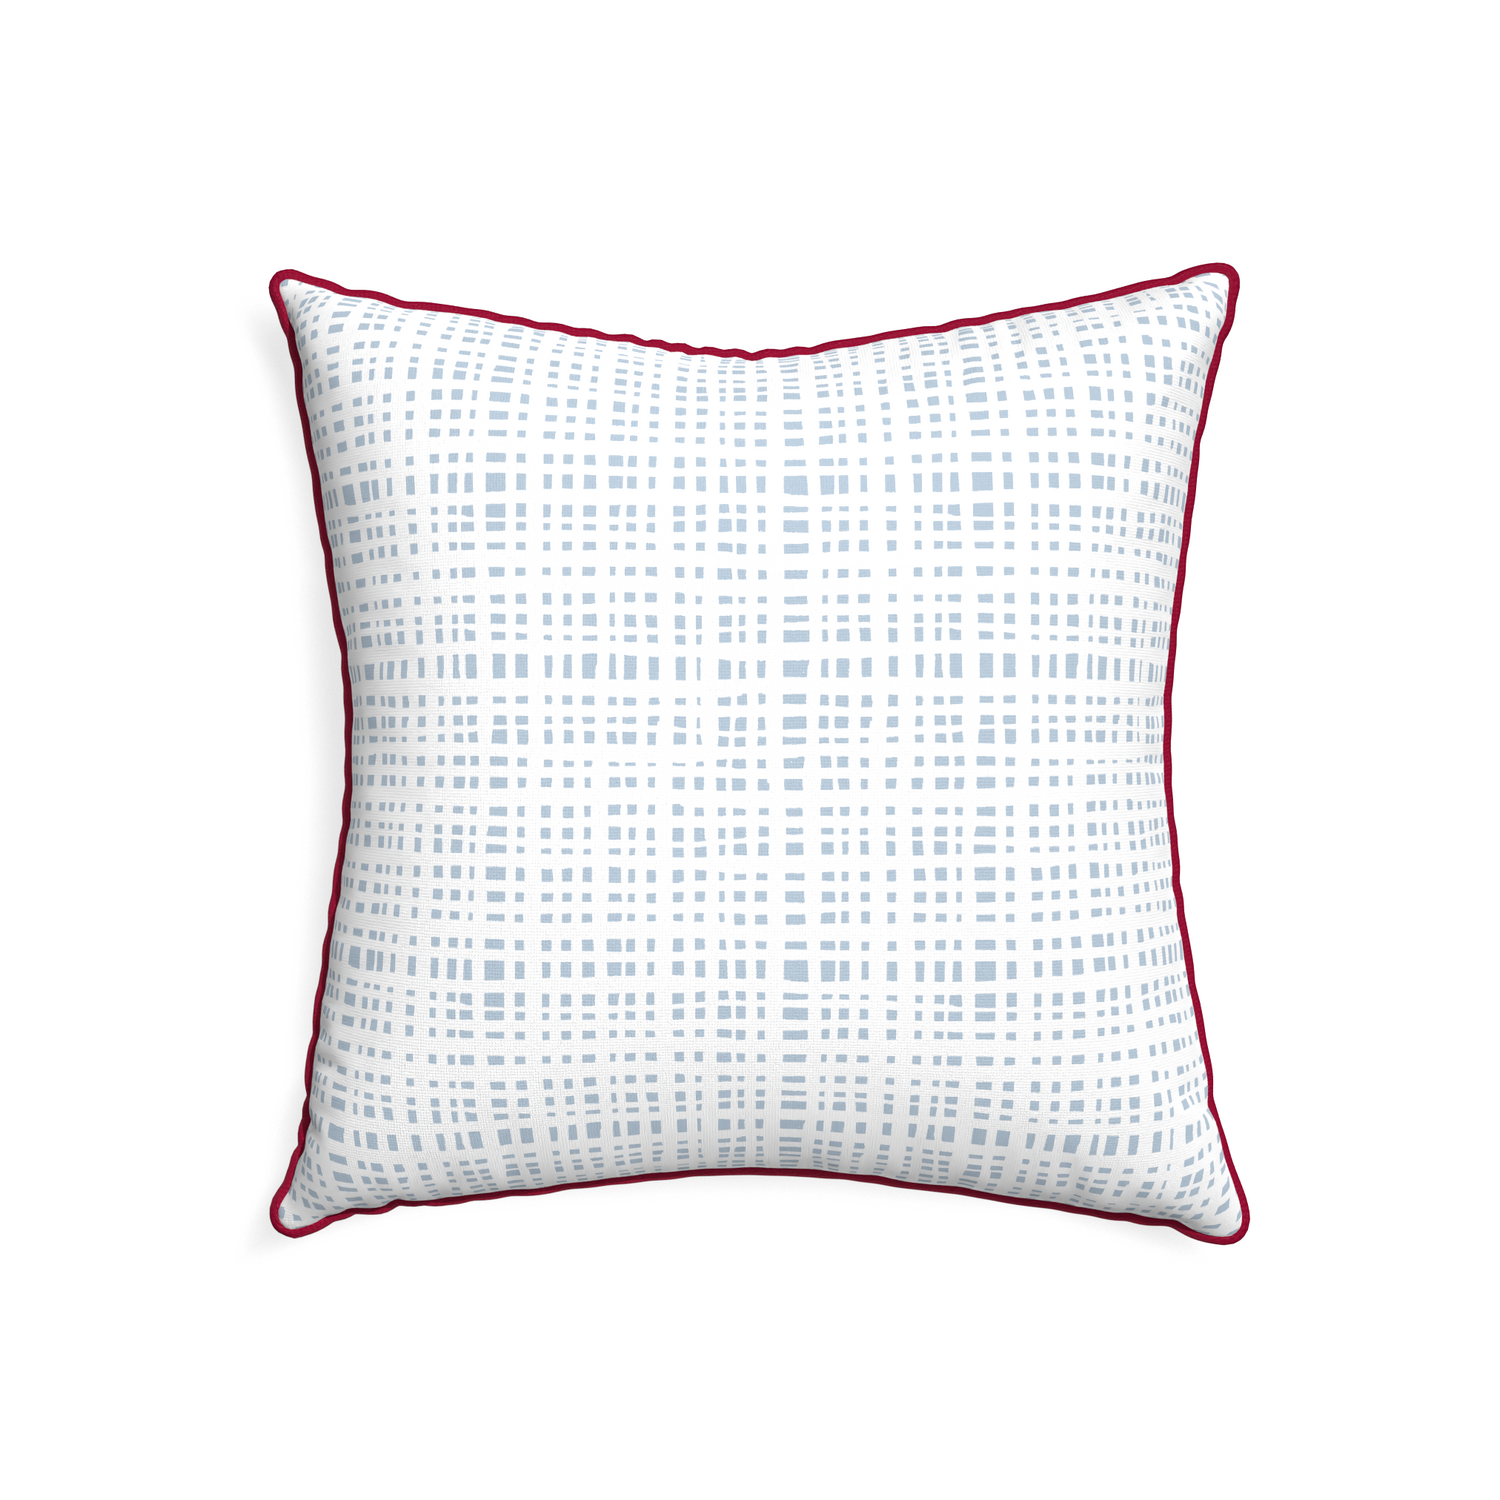 22-square ginger sky custom pillow with raspberry piping on white background